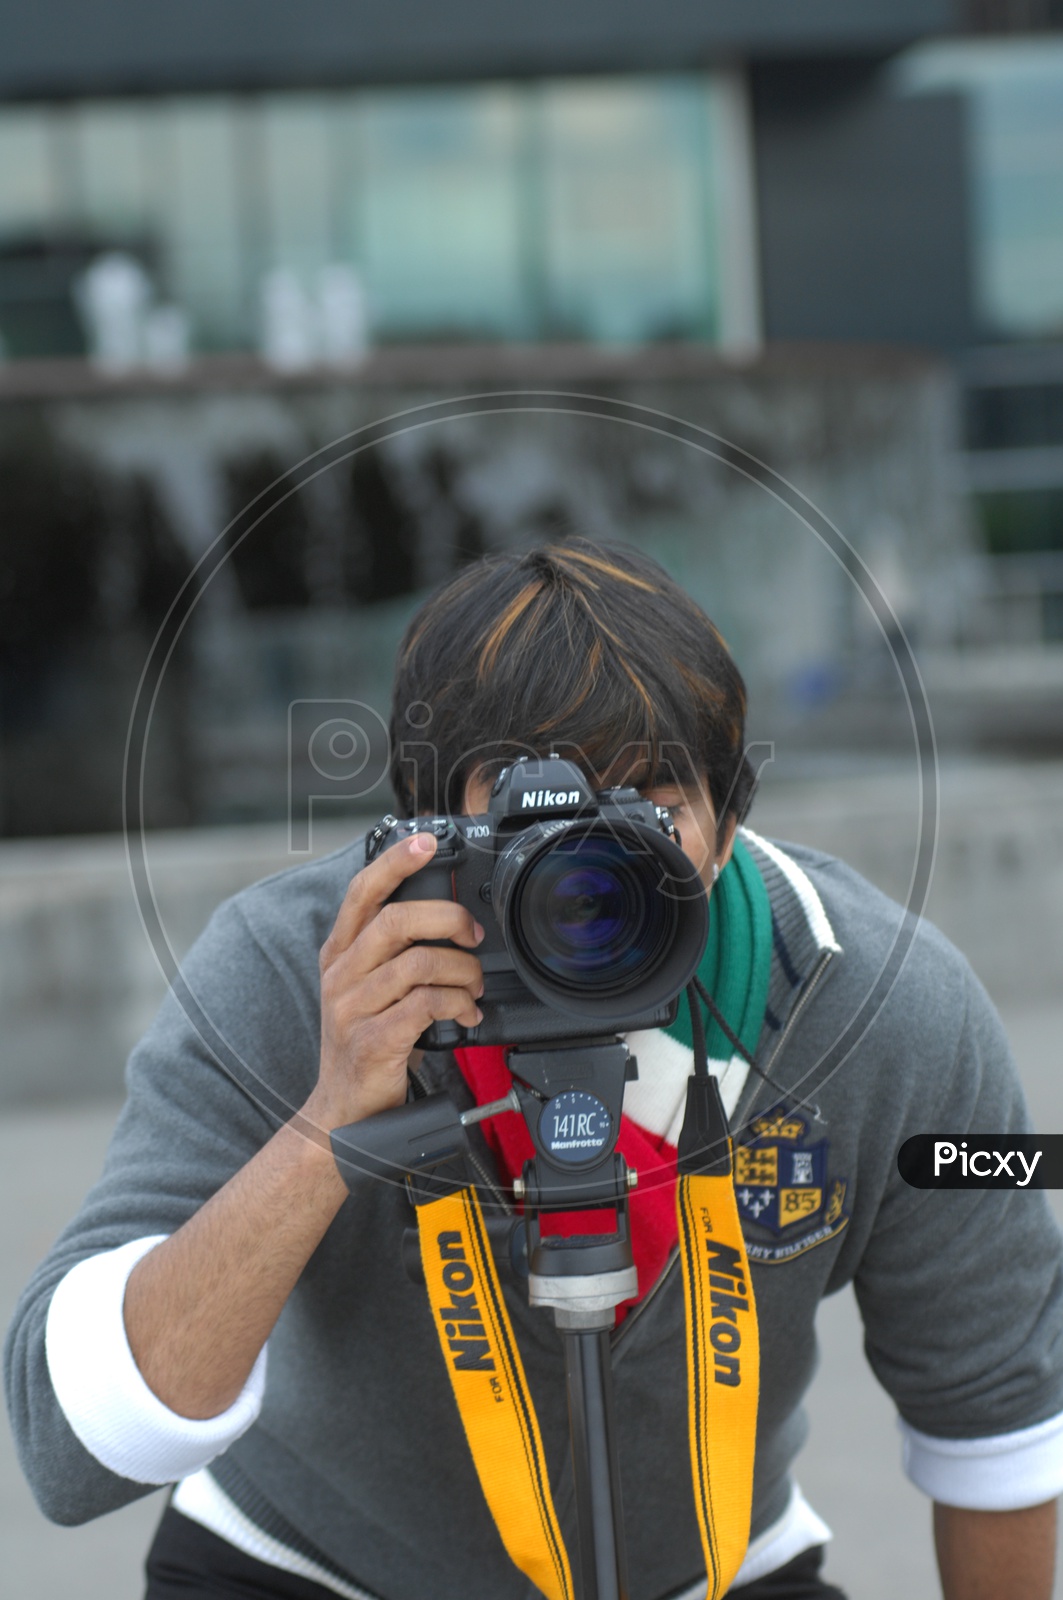 A Photographer With DSLR Camera in an Photo shoot